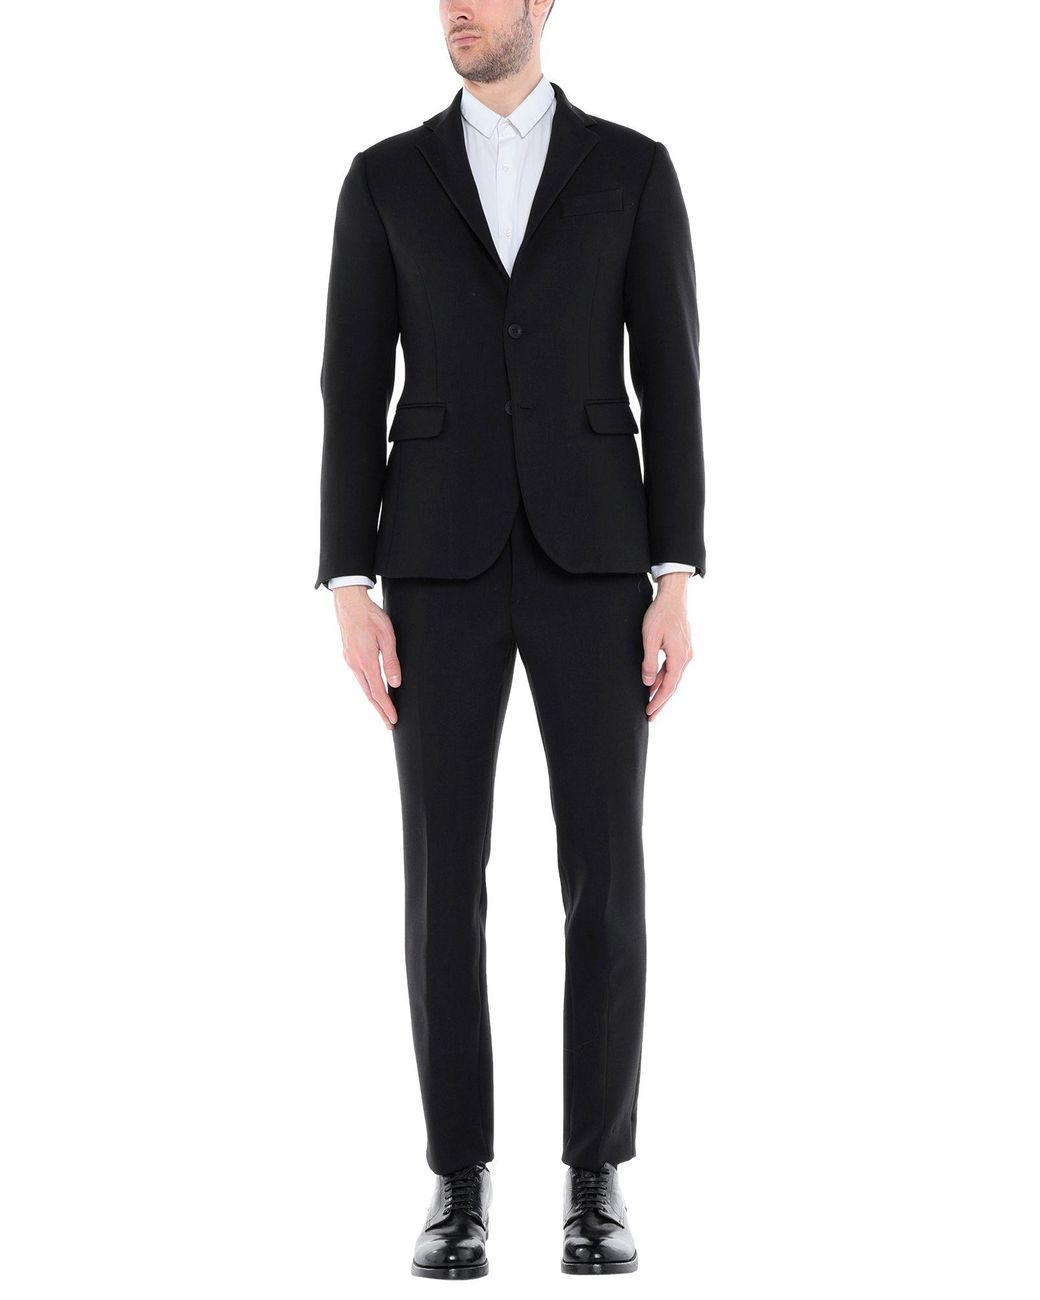 Guess Suit in Black for Men - Lyst